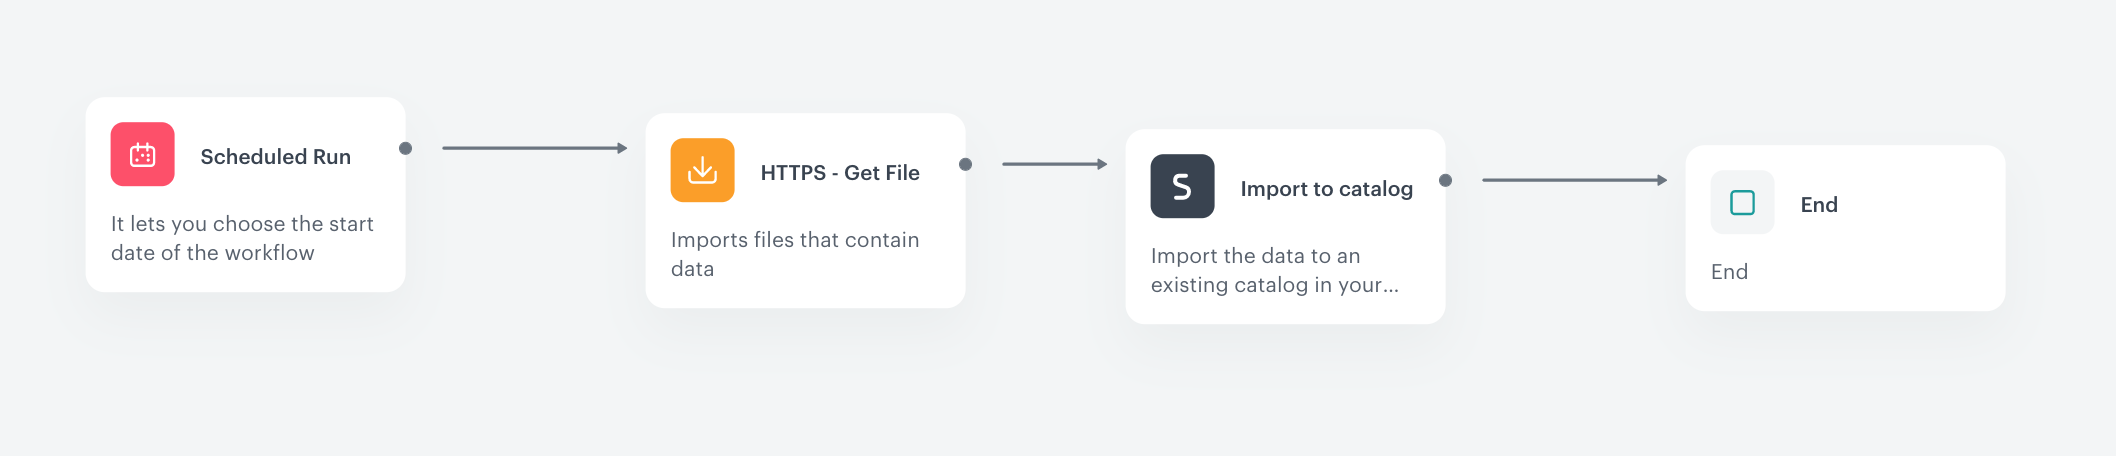 The workflow configuration